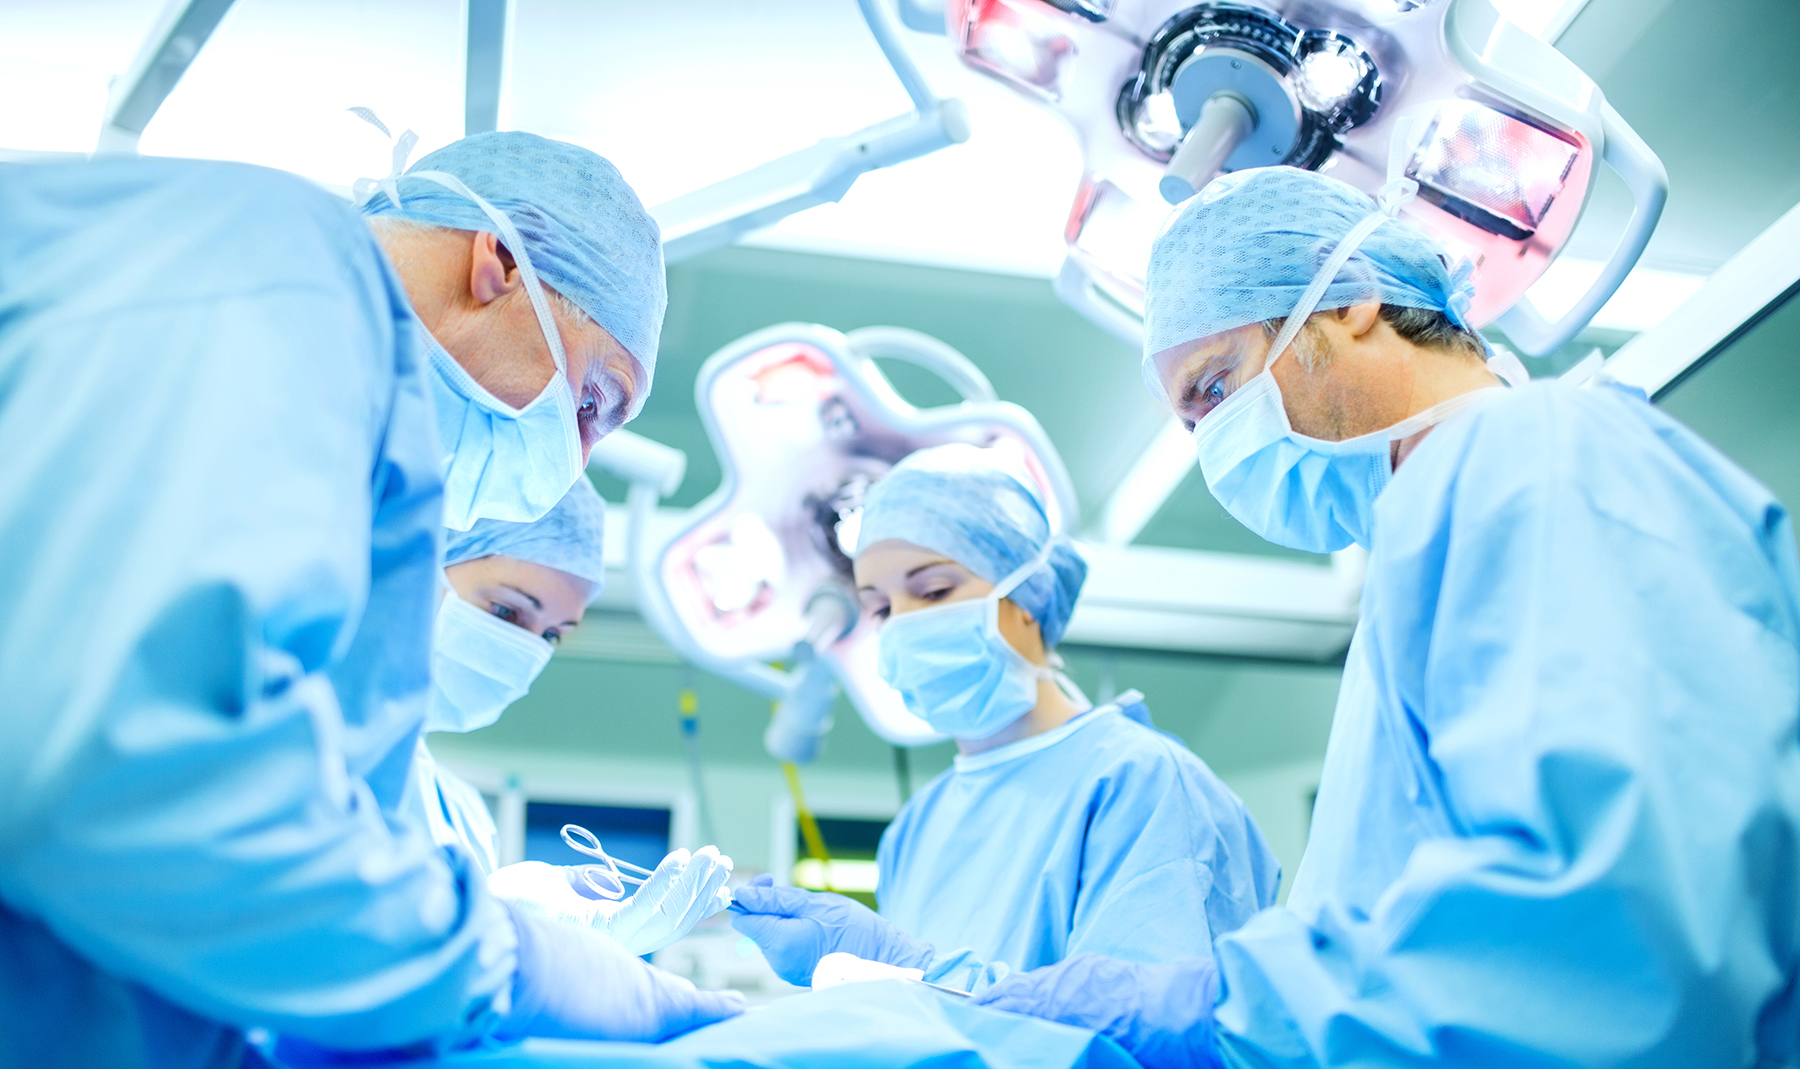 Surgeons Performing Surgery On Patient In Operating Room